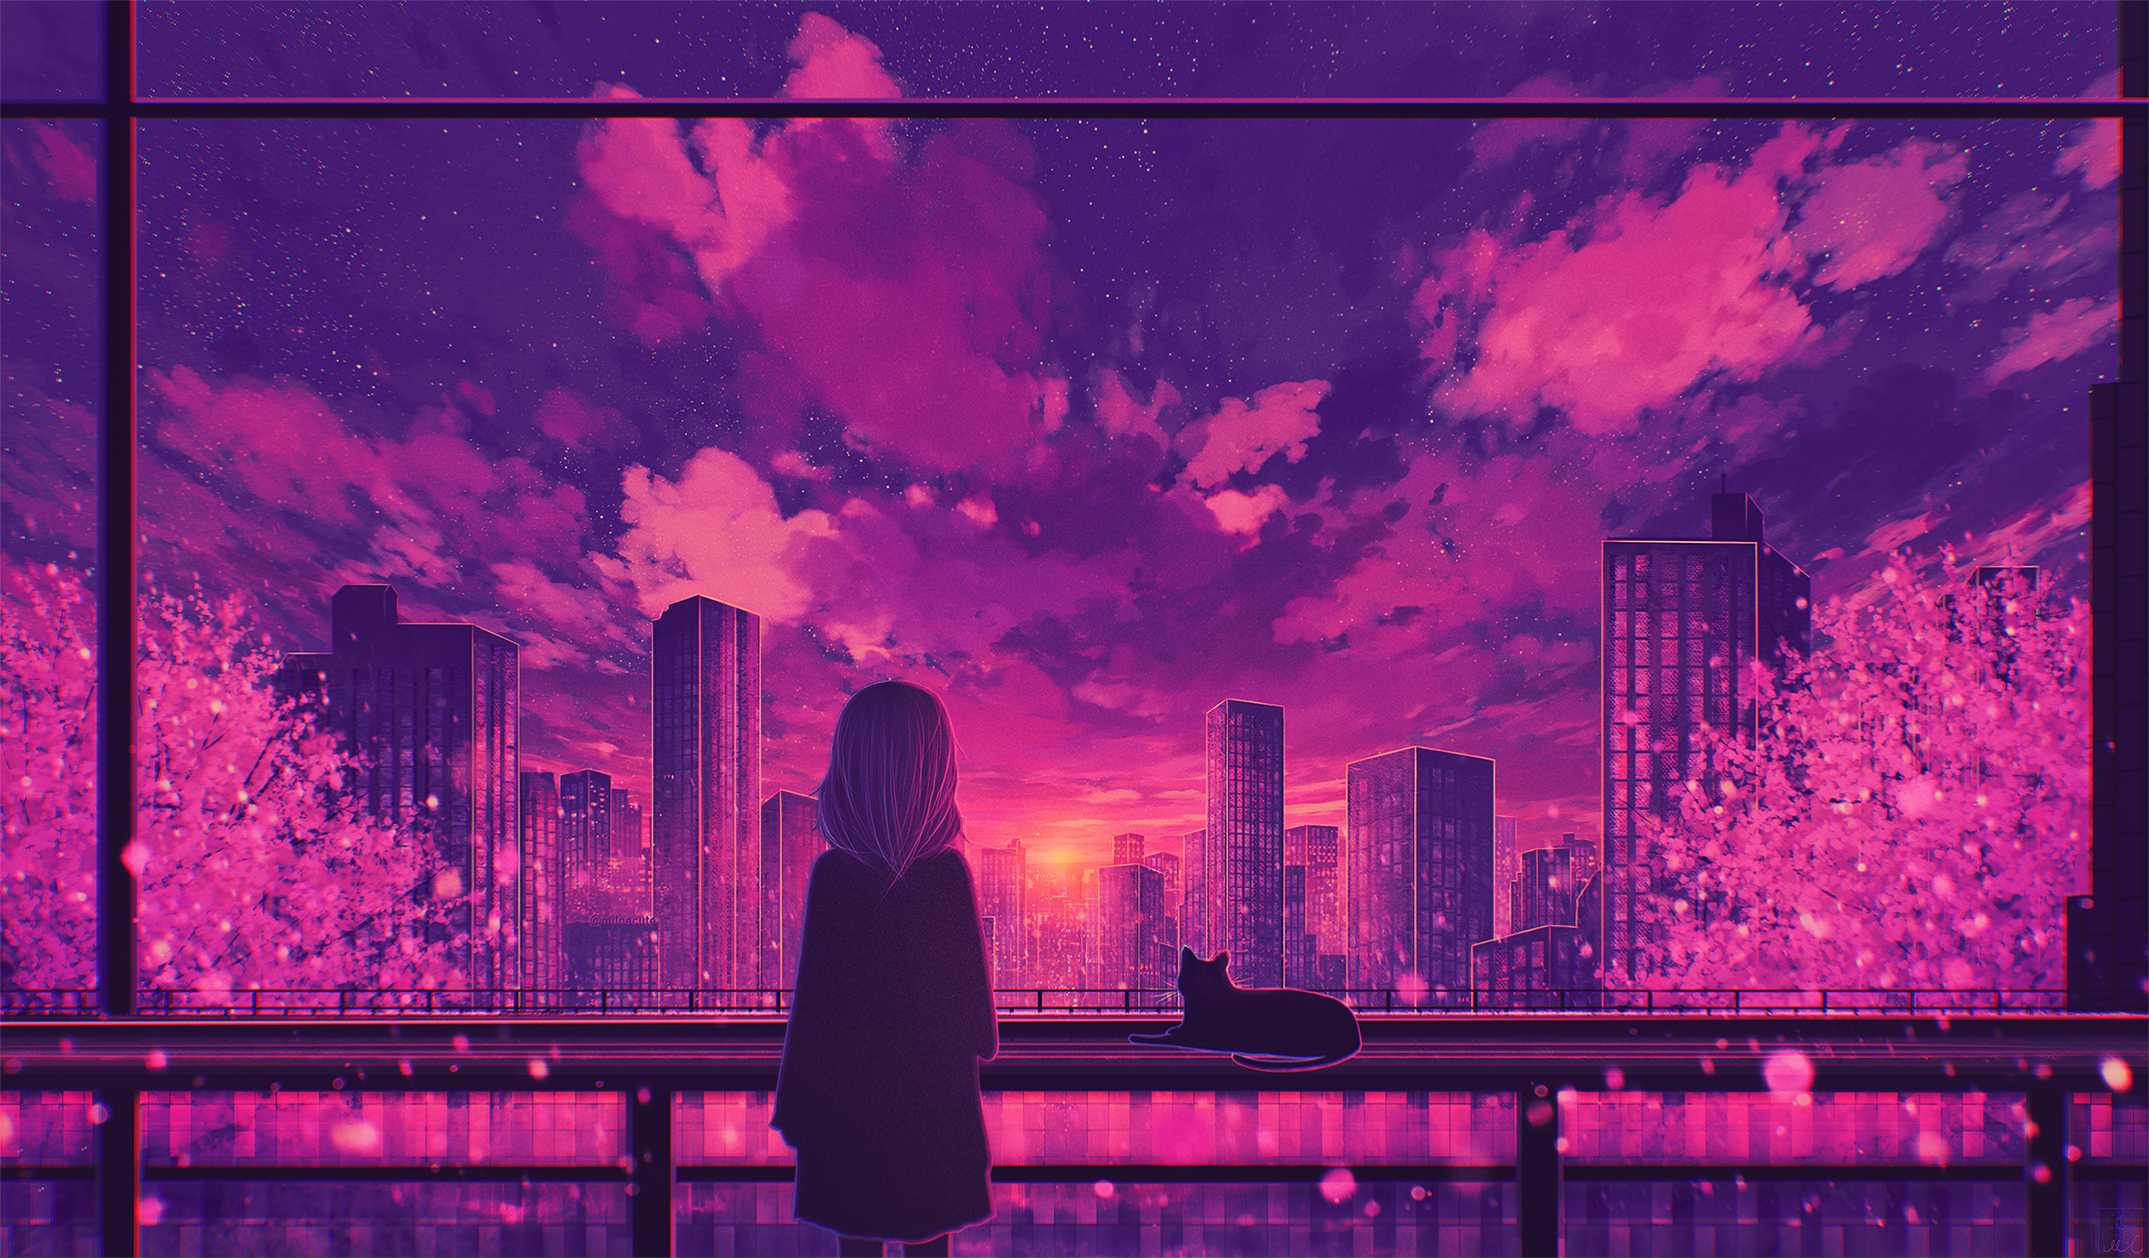 Anime Anime Girls Clouds City Stars Sunset Shoulder Length Hair Trees Fence Purple Background Buildi 2149x1258